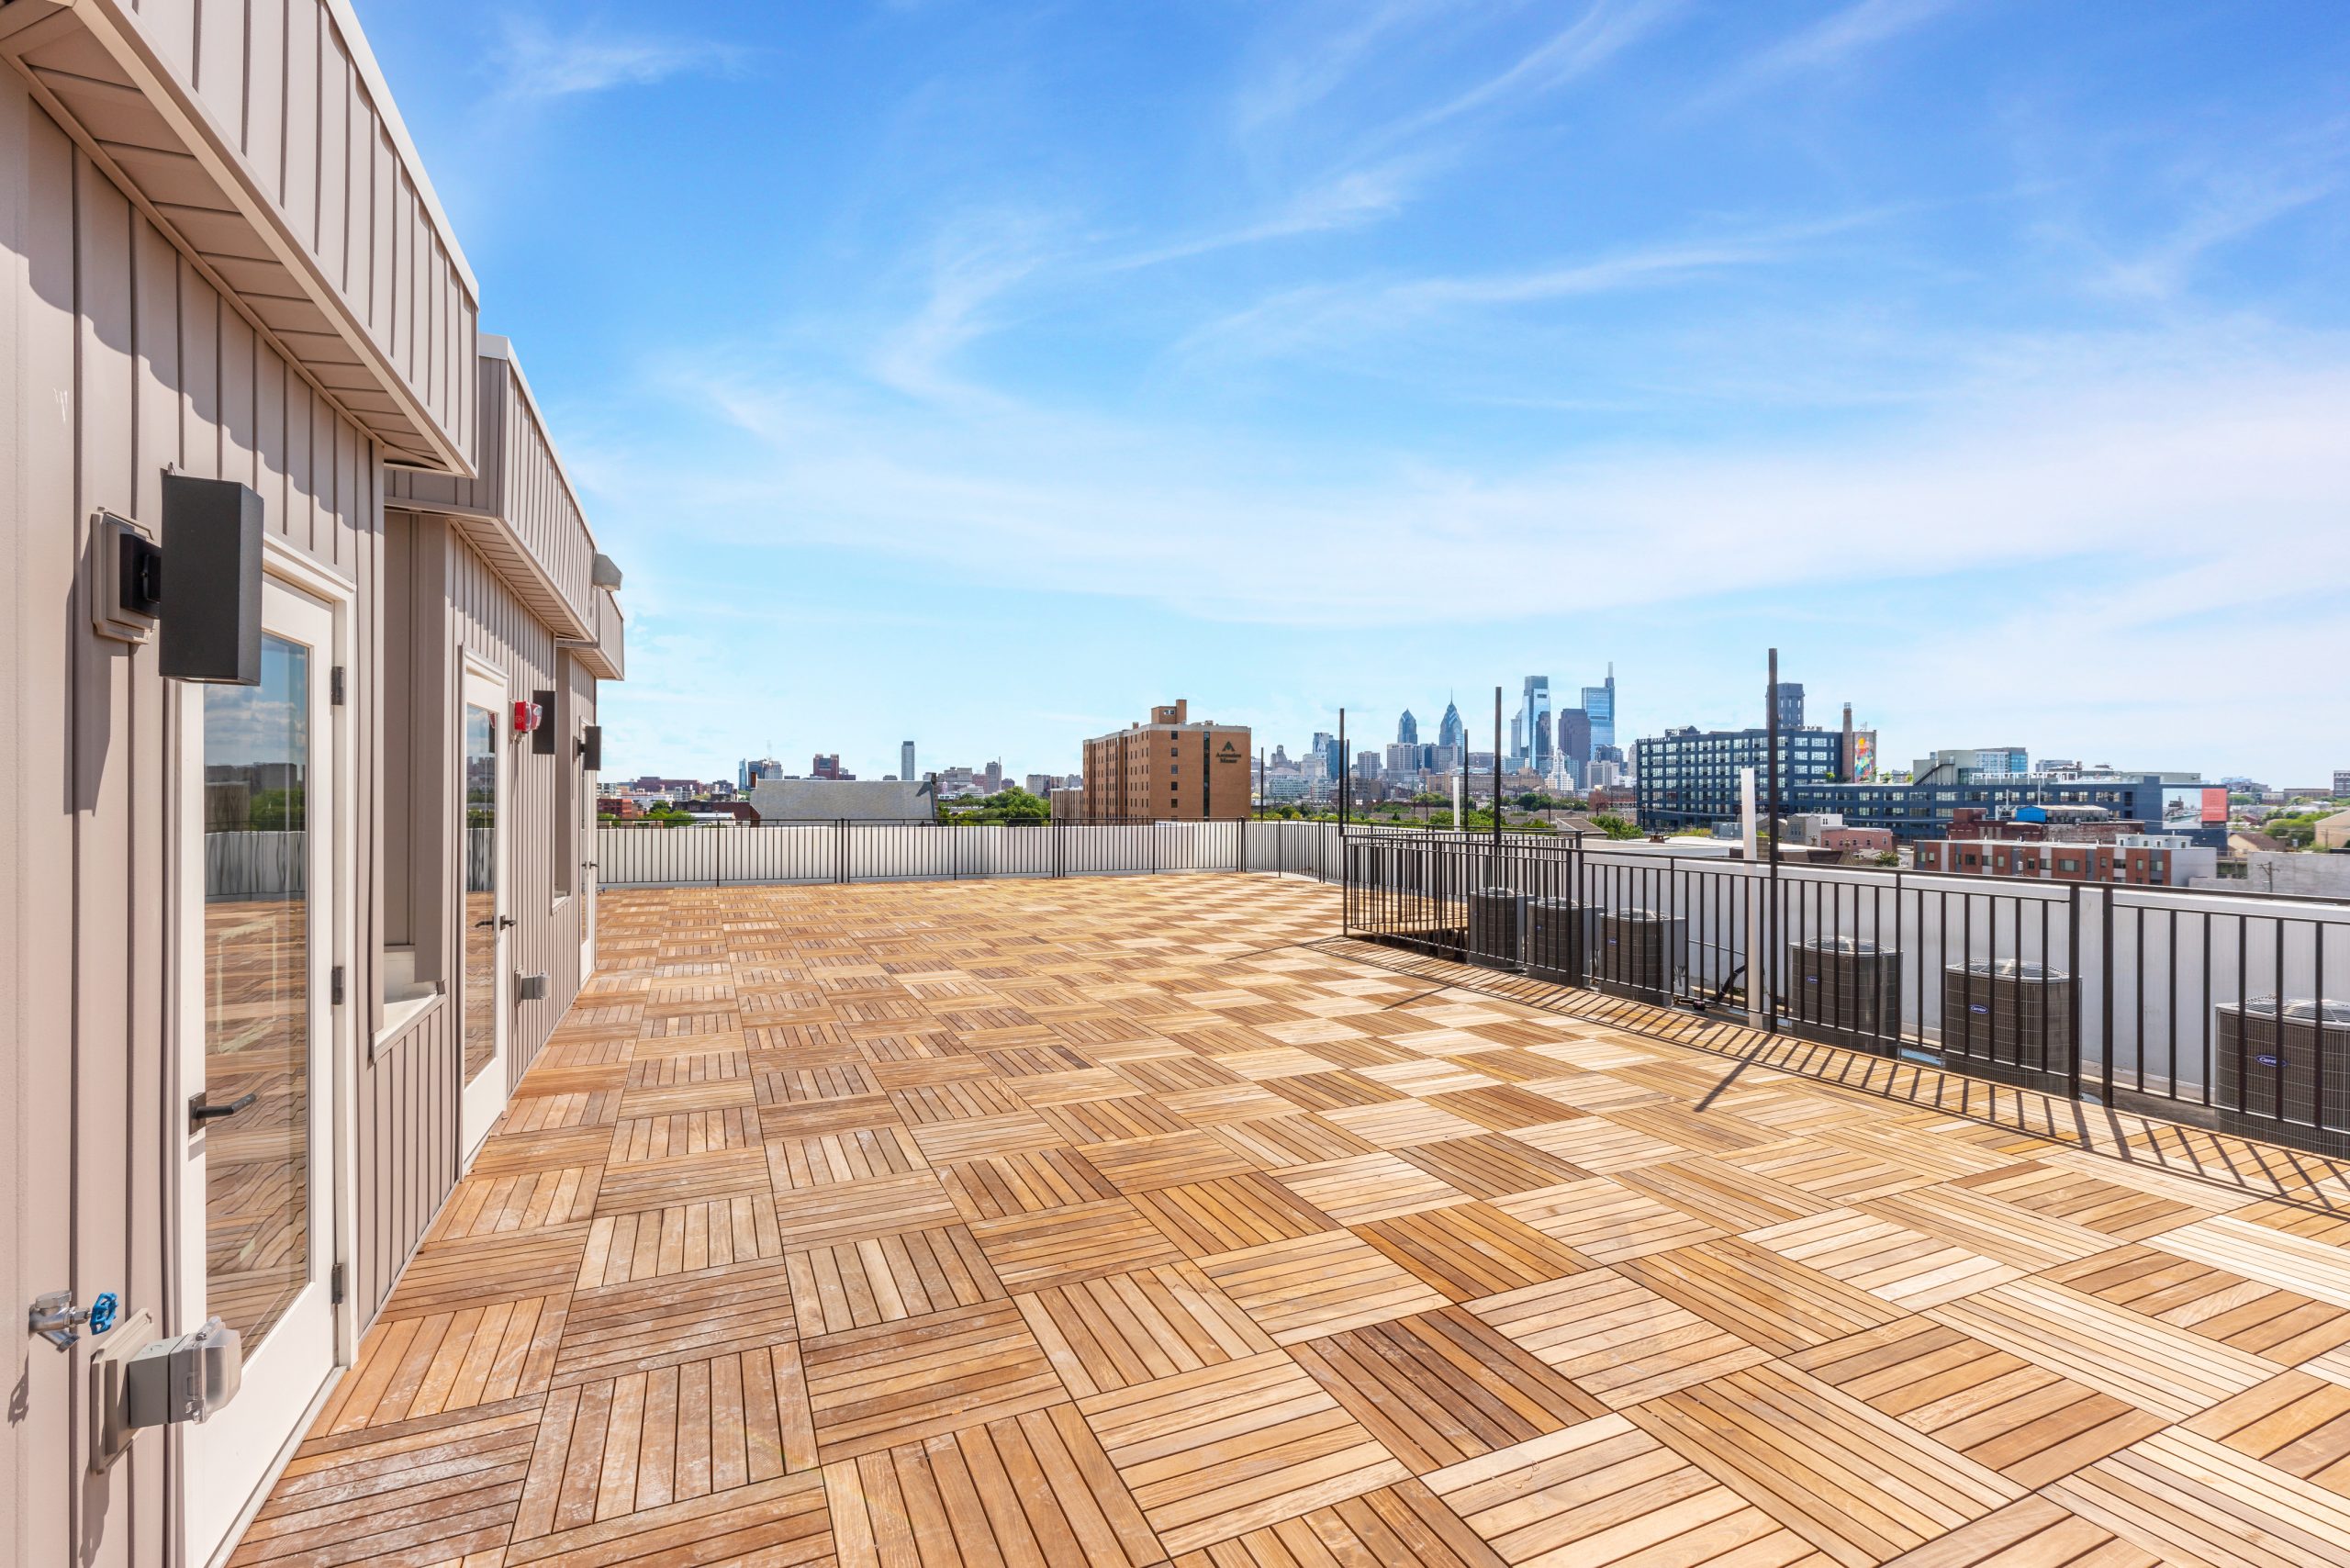 629 W GIRARD AVE ROOF DECK & PATIO PHOTOGRAPHY Ⓒ WEFILMPHILLY-10